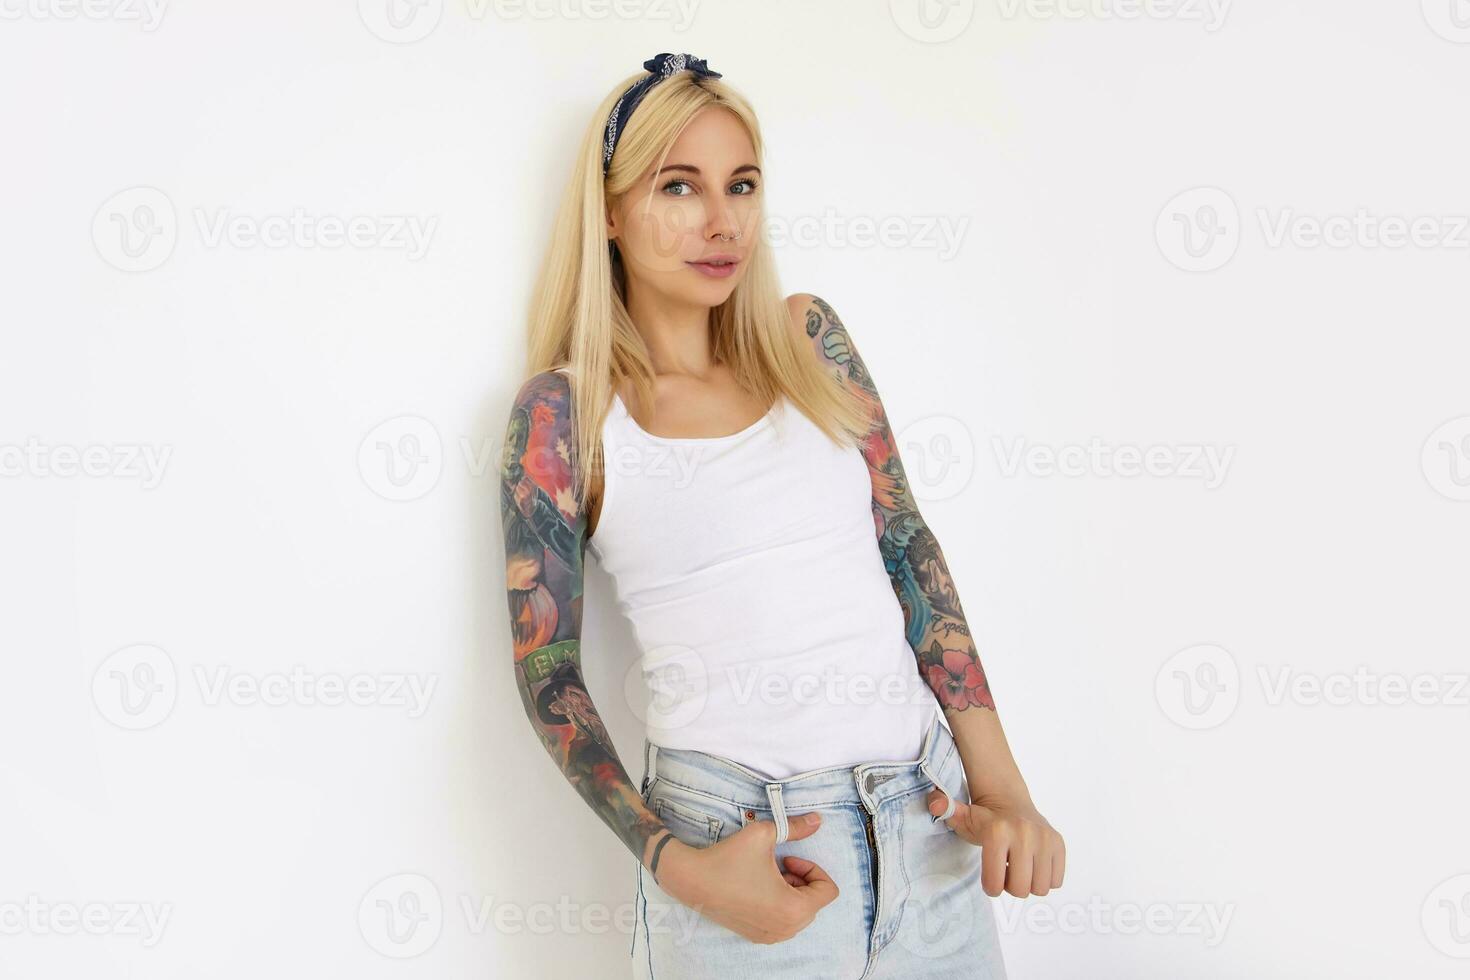 Beautiful young tattooed female with long blonde hair leaning her back on wall while posing over white background in shirt and jeans, smiling slightly while looking at camera photo